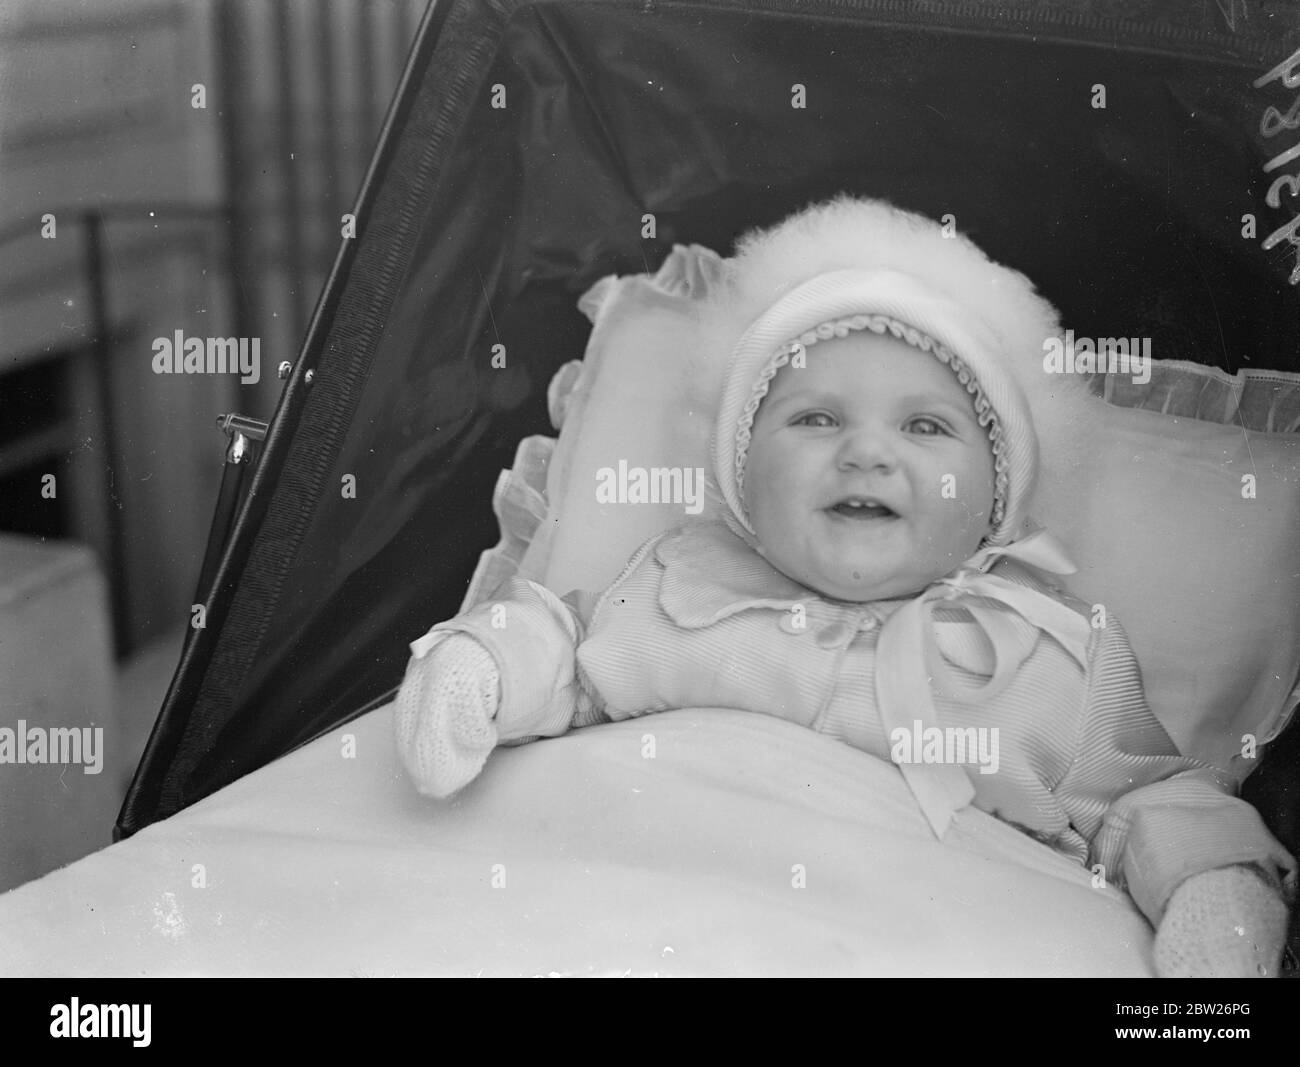 Lord and Lady Herbert's baby daughter goes out in a white woollies. Diana Mary, the baby daughter of Lord and Lady Herbert, proudly showing her two teeth as warmly wrapped up in her white woollies she set out from her home in Eaton Square for an airing. Diana's first birthday will be celebrated on 19 April. 29 January 1938 Stock Photo